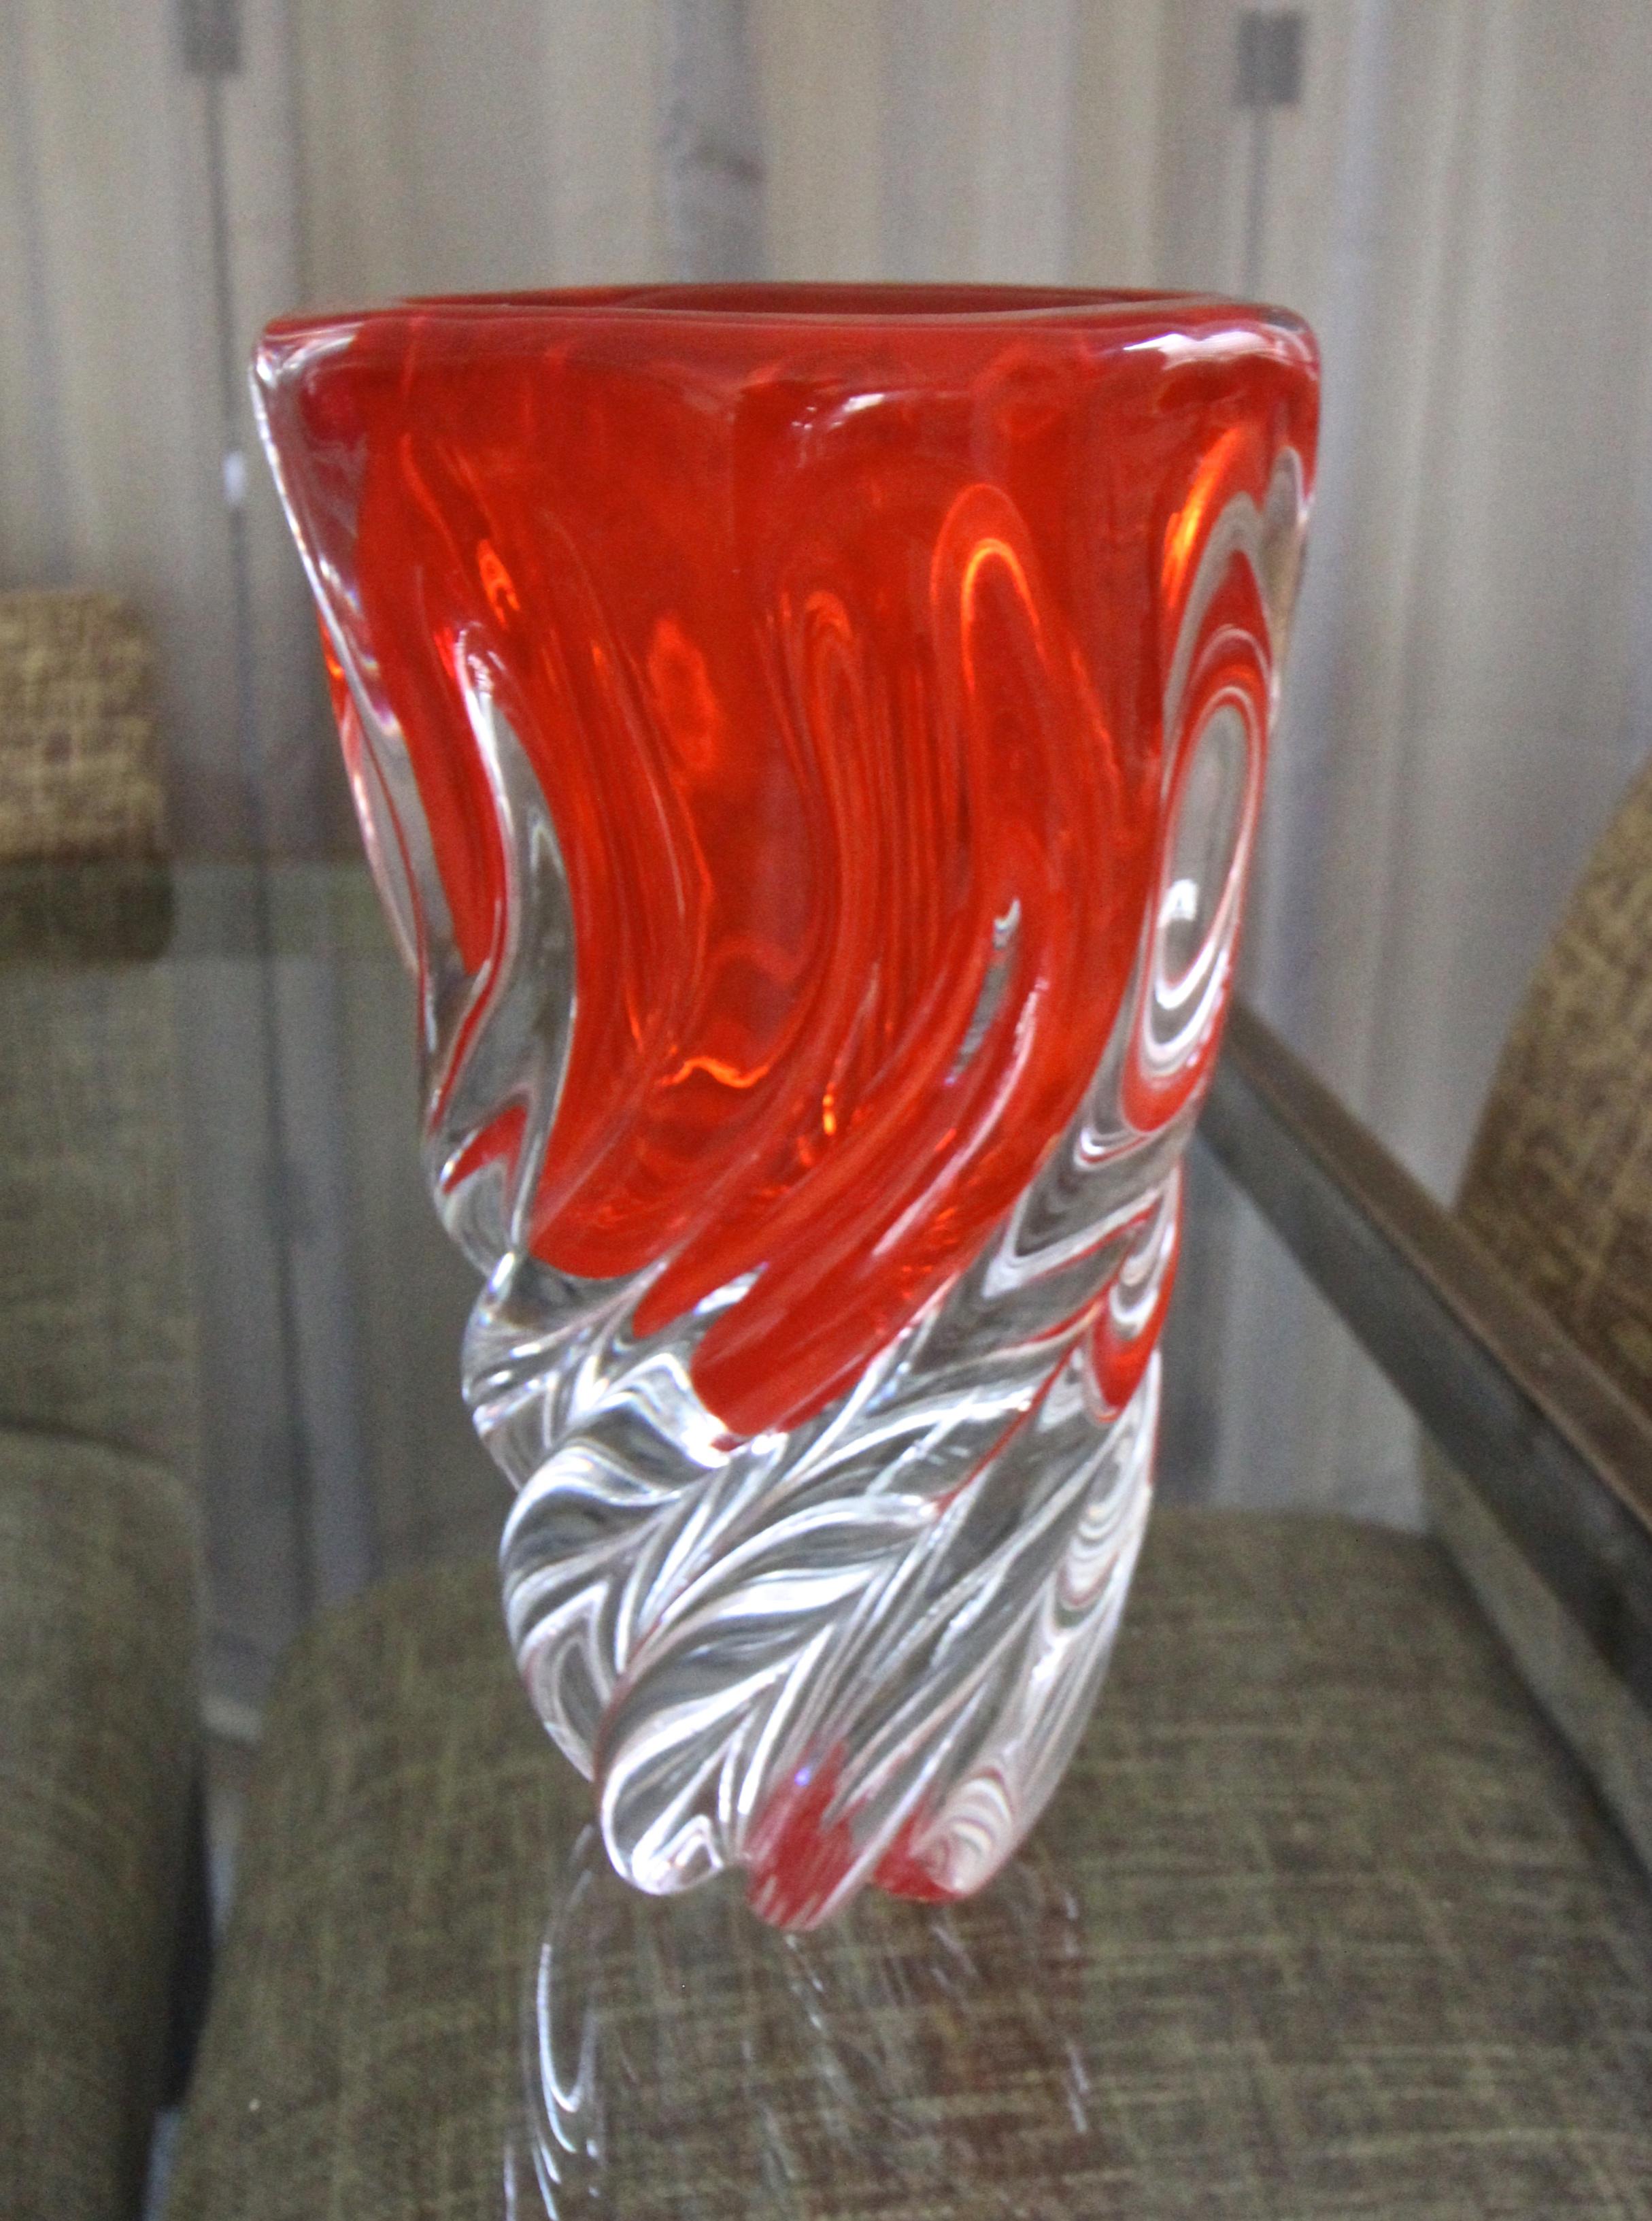 Seguso Blood Orange Twisted Glass Murano Vase In Good Condition For Sale In Palm Springs, CA